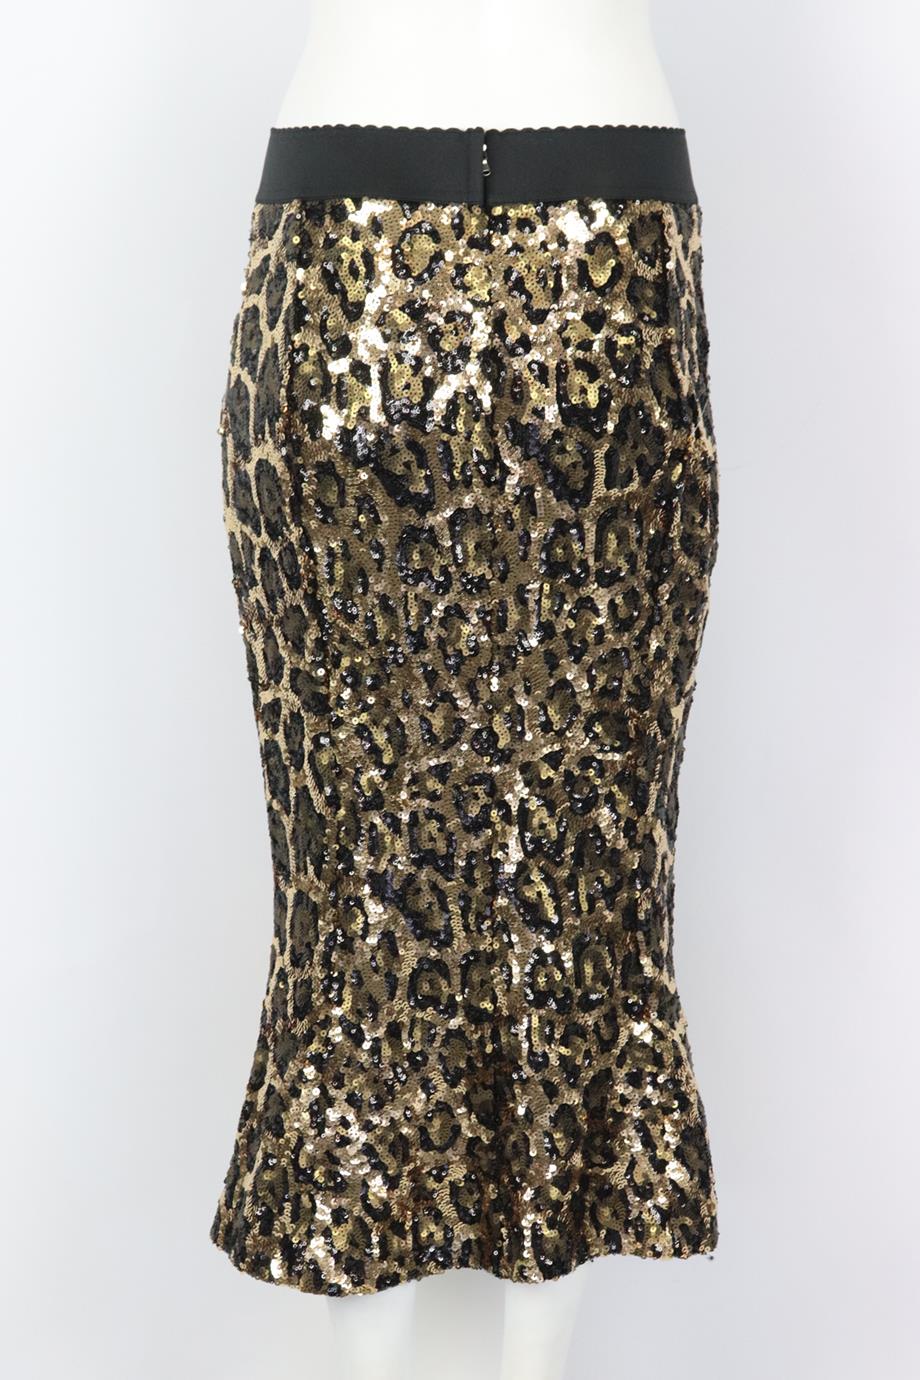 DOLCE AND GABBANA LEOPARD PRINT SEQUINED CREPE MIDI SKIRT IT 42 UK 10